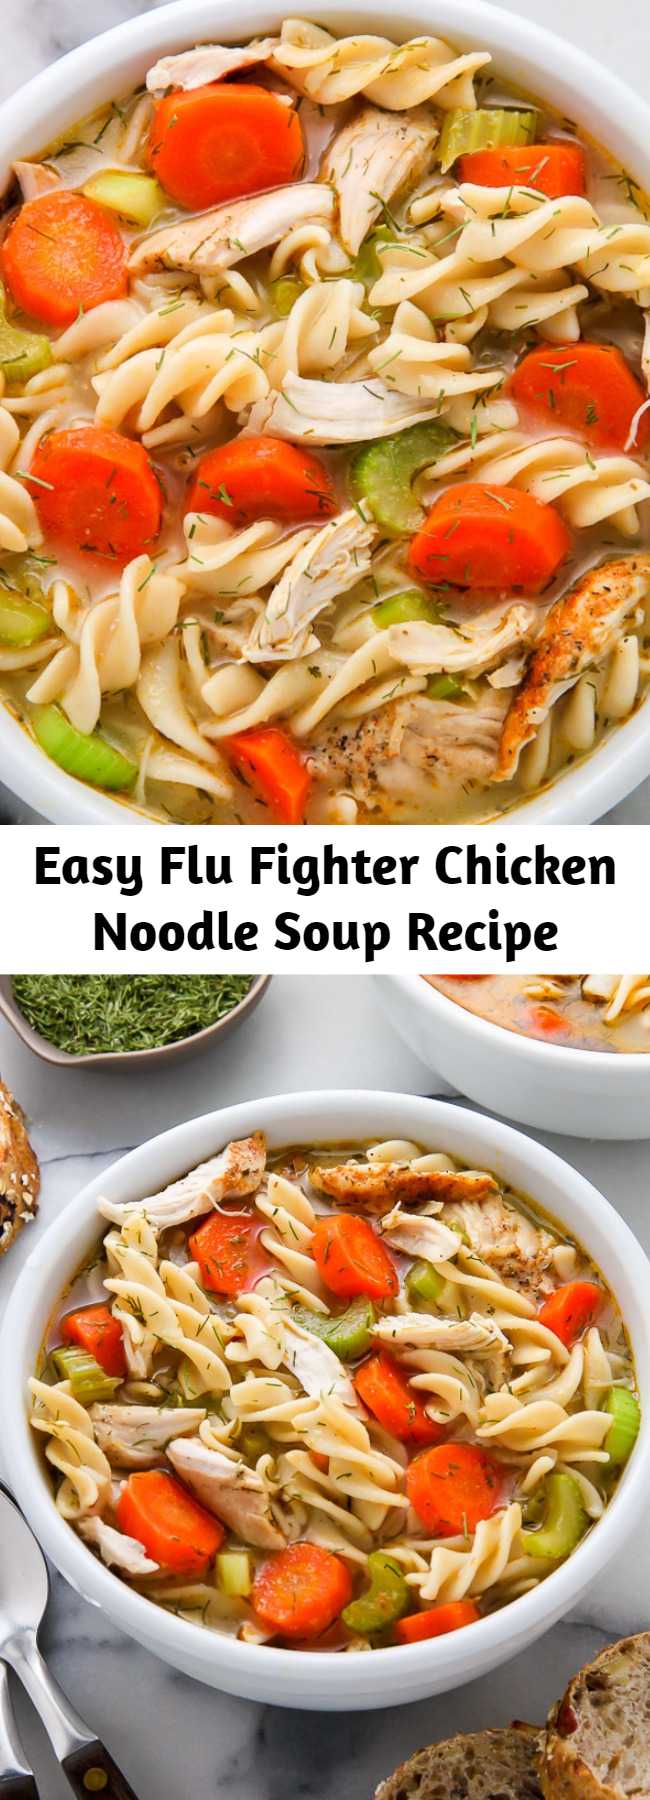 Easy Flu Fighter Chicken Noodle Soup Recipe - Got a cold? Then you need to try this Flu Fighter Chicken Noodle Soup! Flu Fighter Chicken Noodle Soup is the ultimate comfort food when you’re feeling sick! Loaded with tender chicken, carrots, celery, onion, egg noodles, lemon juice, and dill, this soup is so flavorful. Even kids love this healthy recipe!